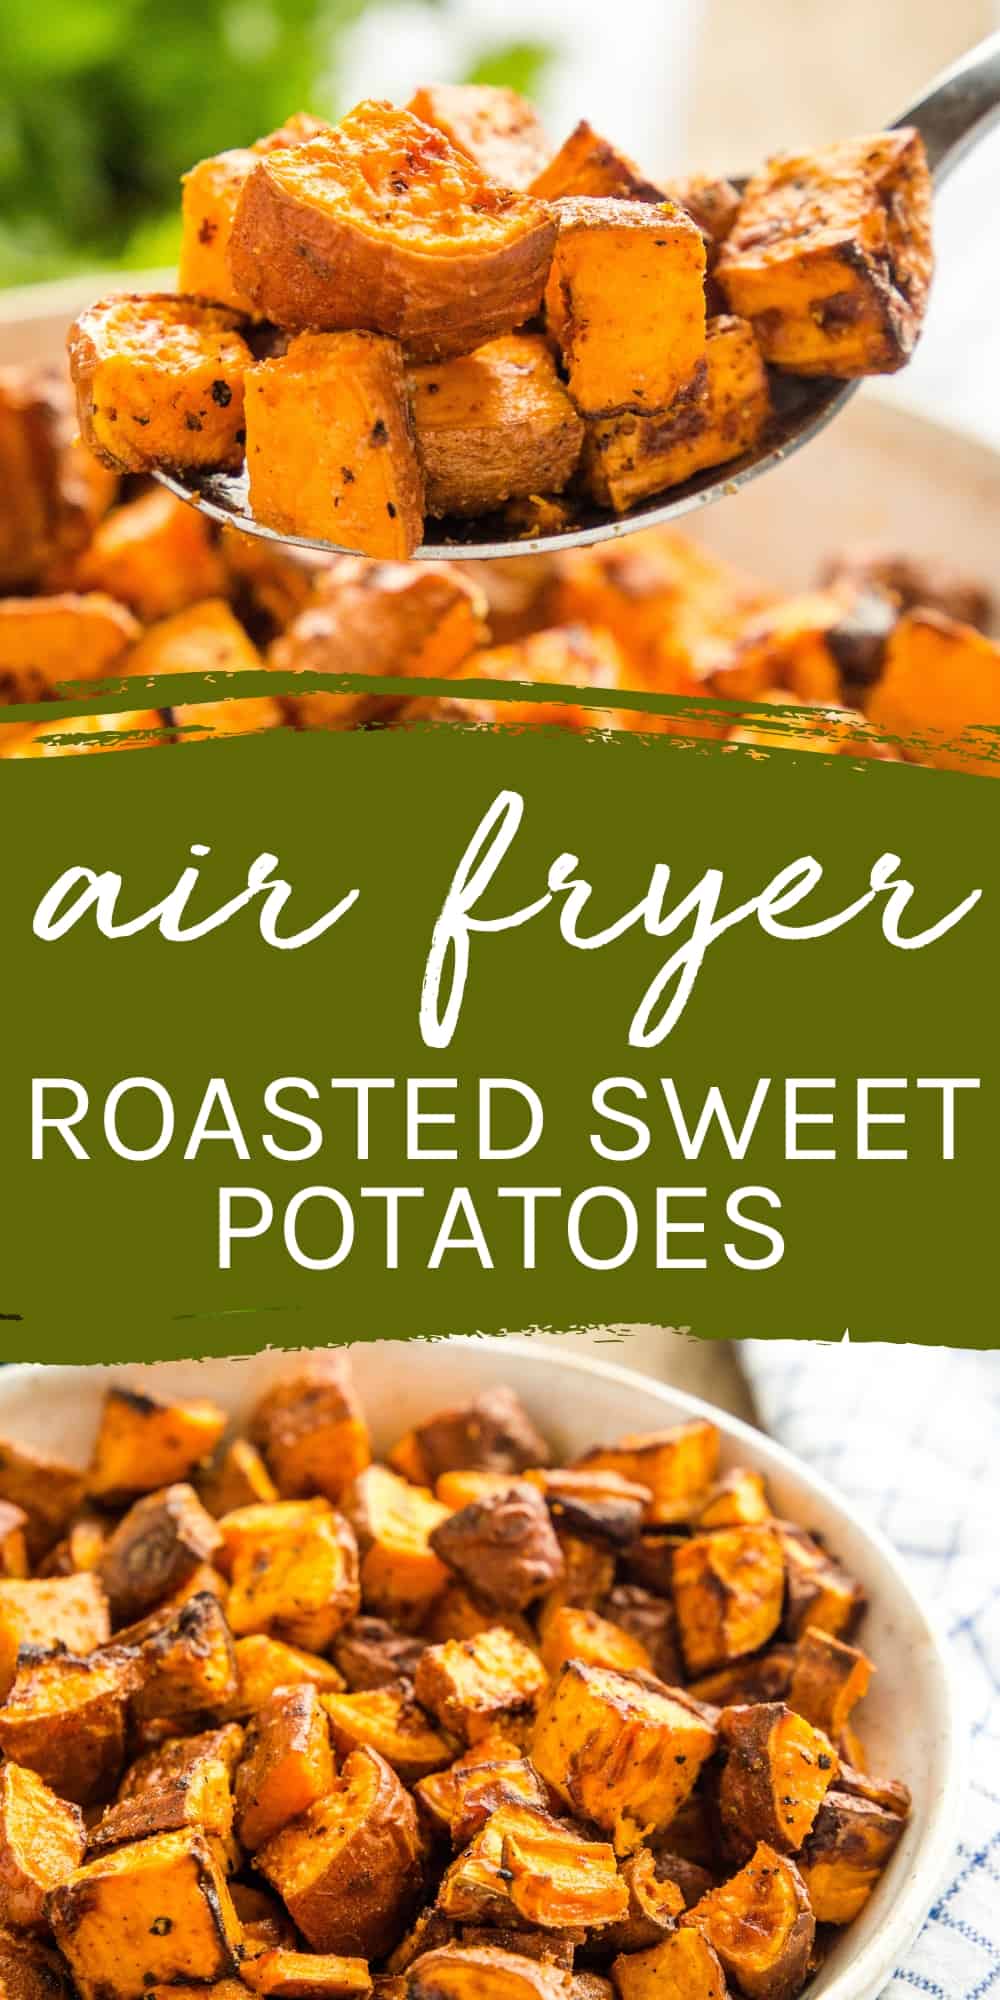 This Air Fryer Sweet Potatoes Recipe is the perfect healthy side dish that's ready in minutes! Seasoned and roasted sweet potatoes that are crispy on the outside, soft on the inside, & made with basic ingredients! Recipe from thebusybaker.ca! #sweetpotatoes #airfryersweetpotatoes #friedsweetpotatoes #roastedsweetpotatoes #sweetpotatoes #healthy #wholefoods #sidedish #easyrecipe via @busybakerblog